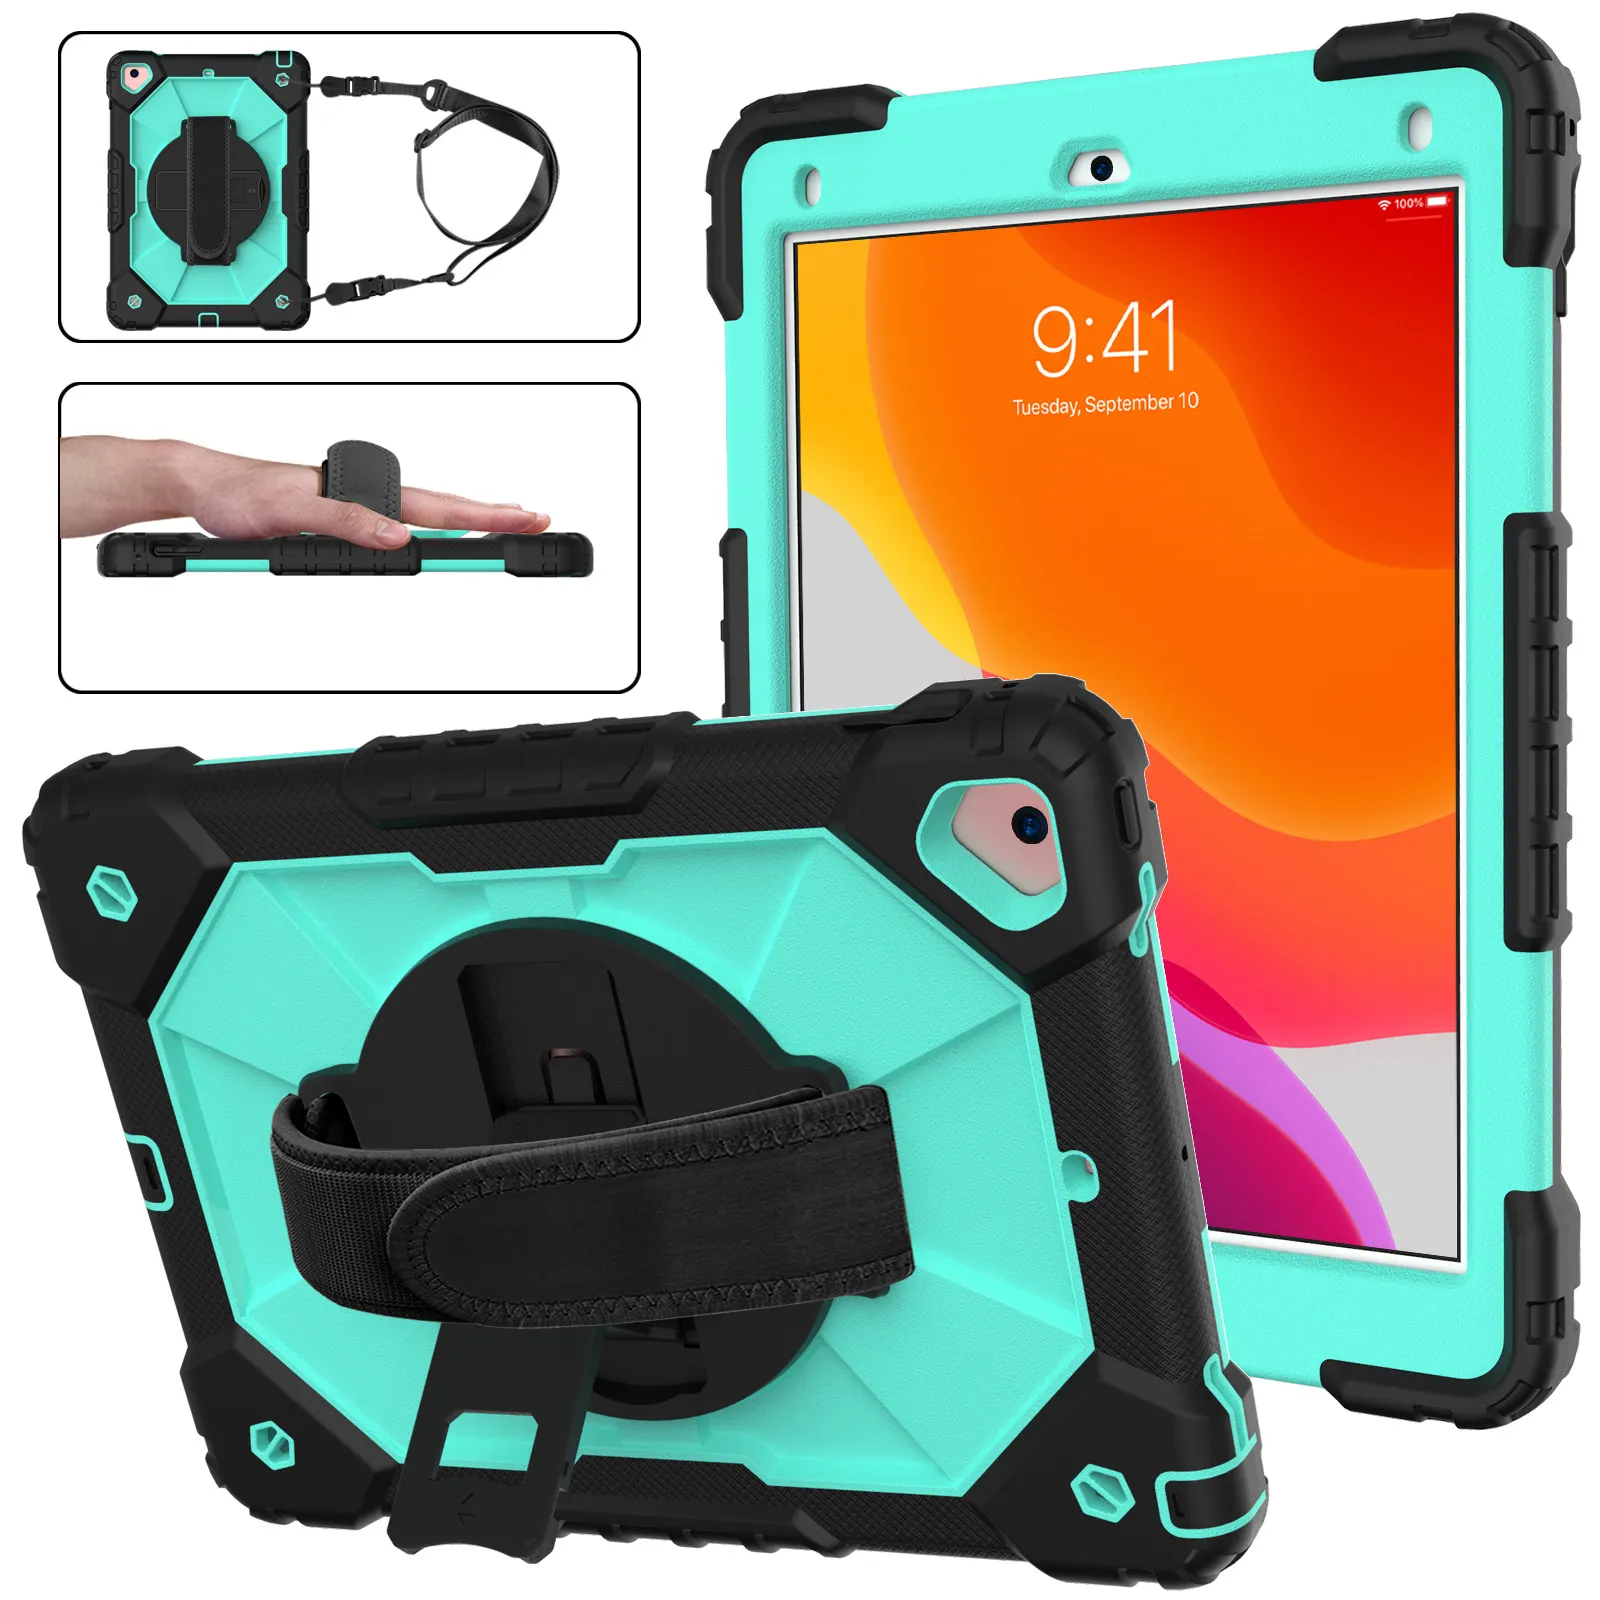 Rotating Tablet PC Cases for iPad 9.7 6 Pro 9.7 Silicone Plastic Hybrid Kickstand Rugged Armor Full Protection Anti-shock Cover with Handle Long Shoulder Strap